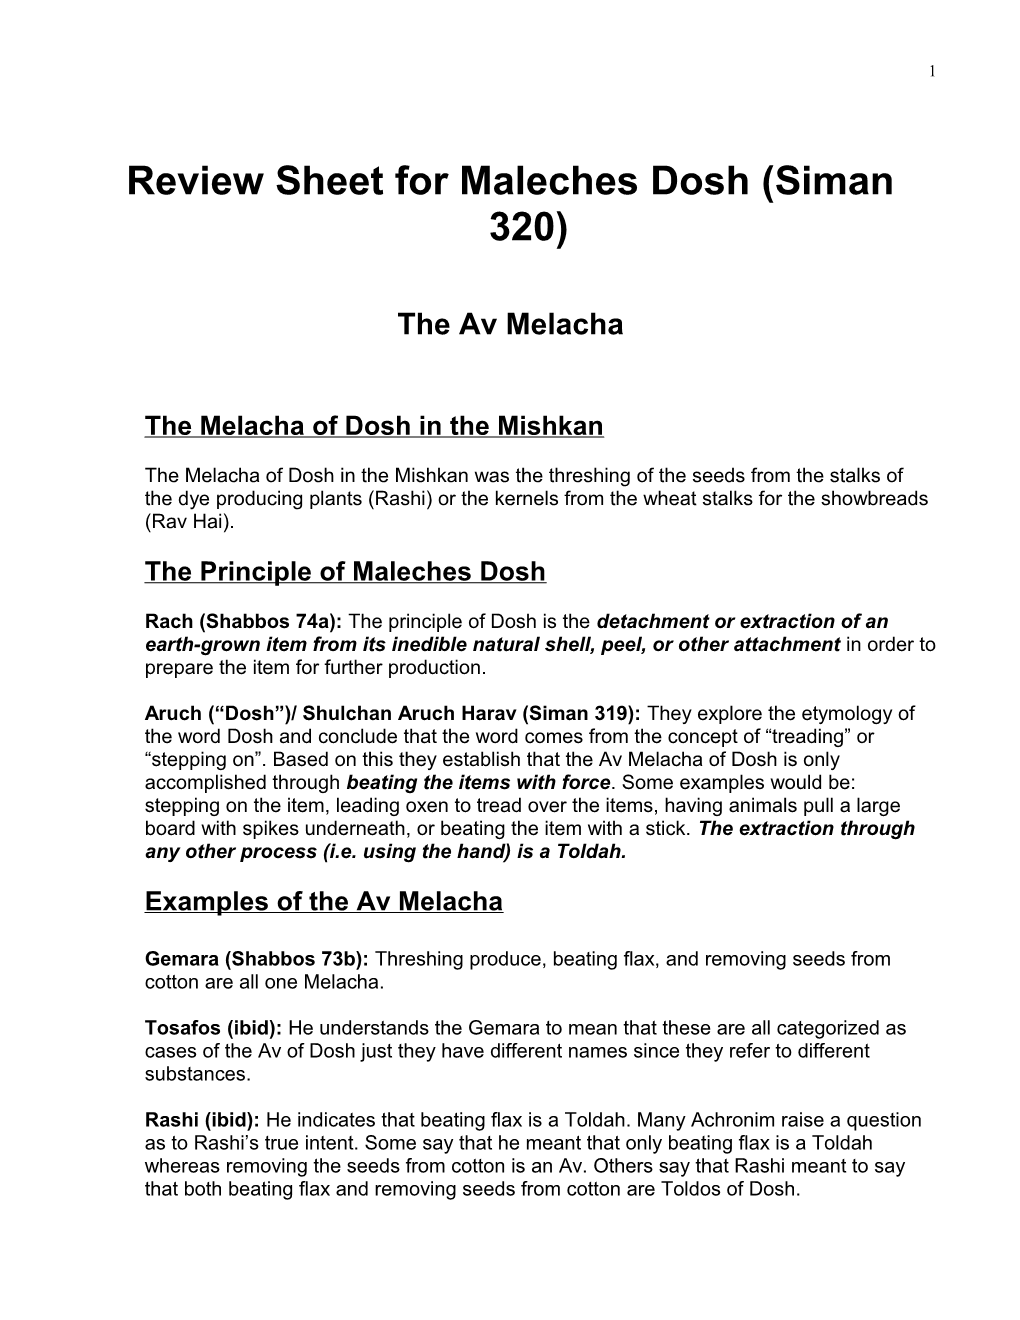 Review Sheet for Maleches Dosh (Siman 320)